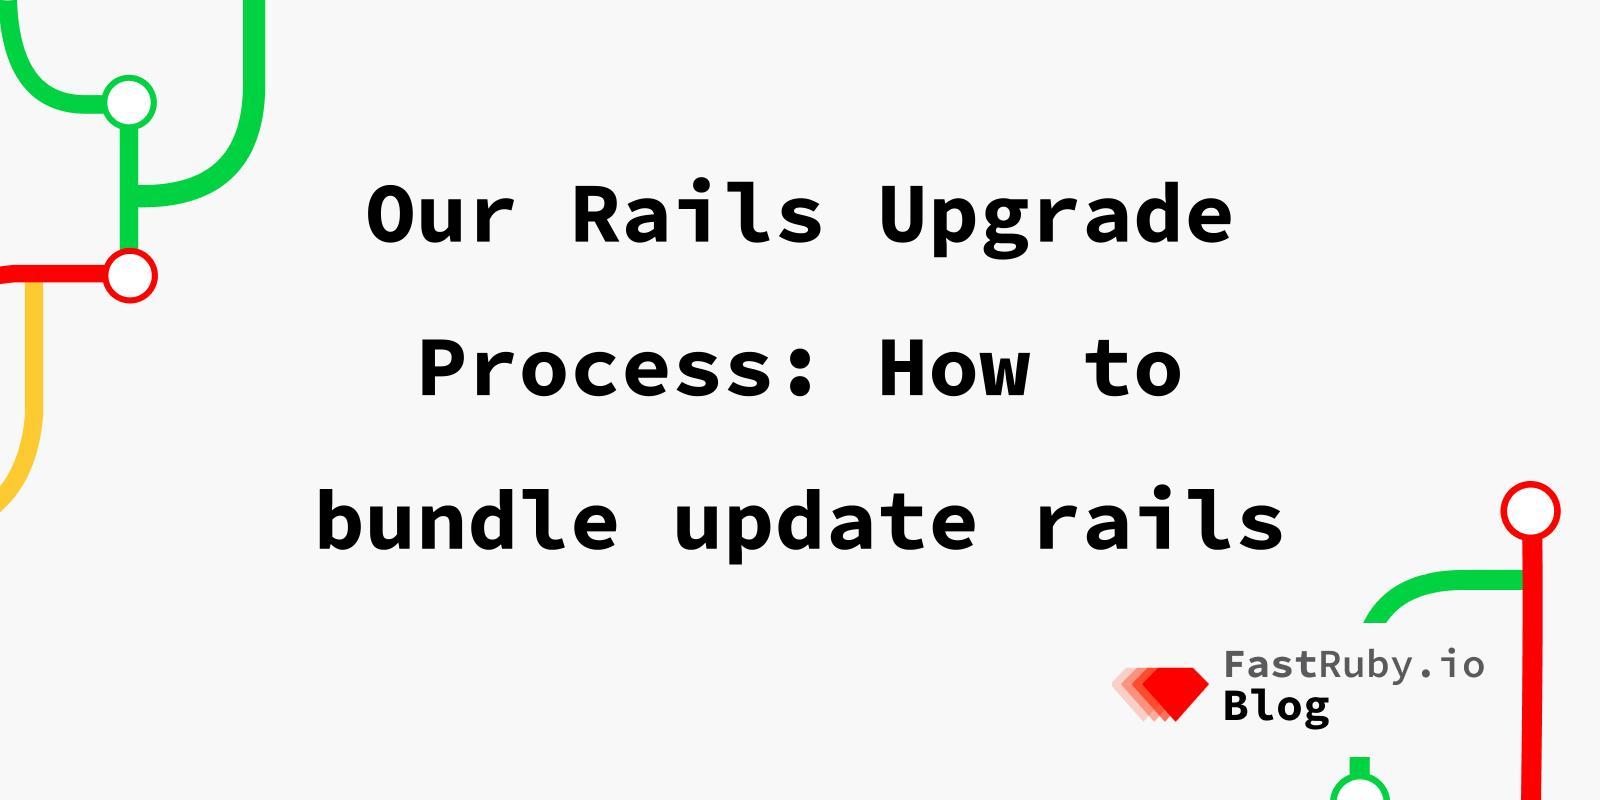 Our Rails Upgrade Process: How to bundle update rails